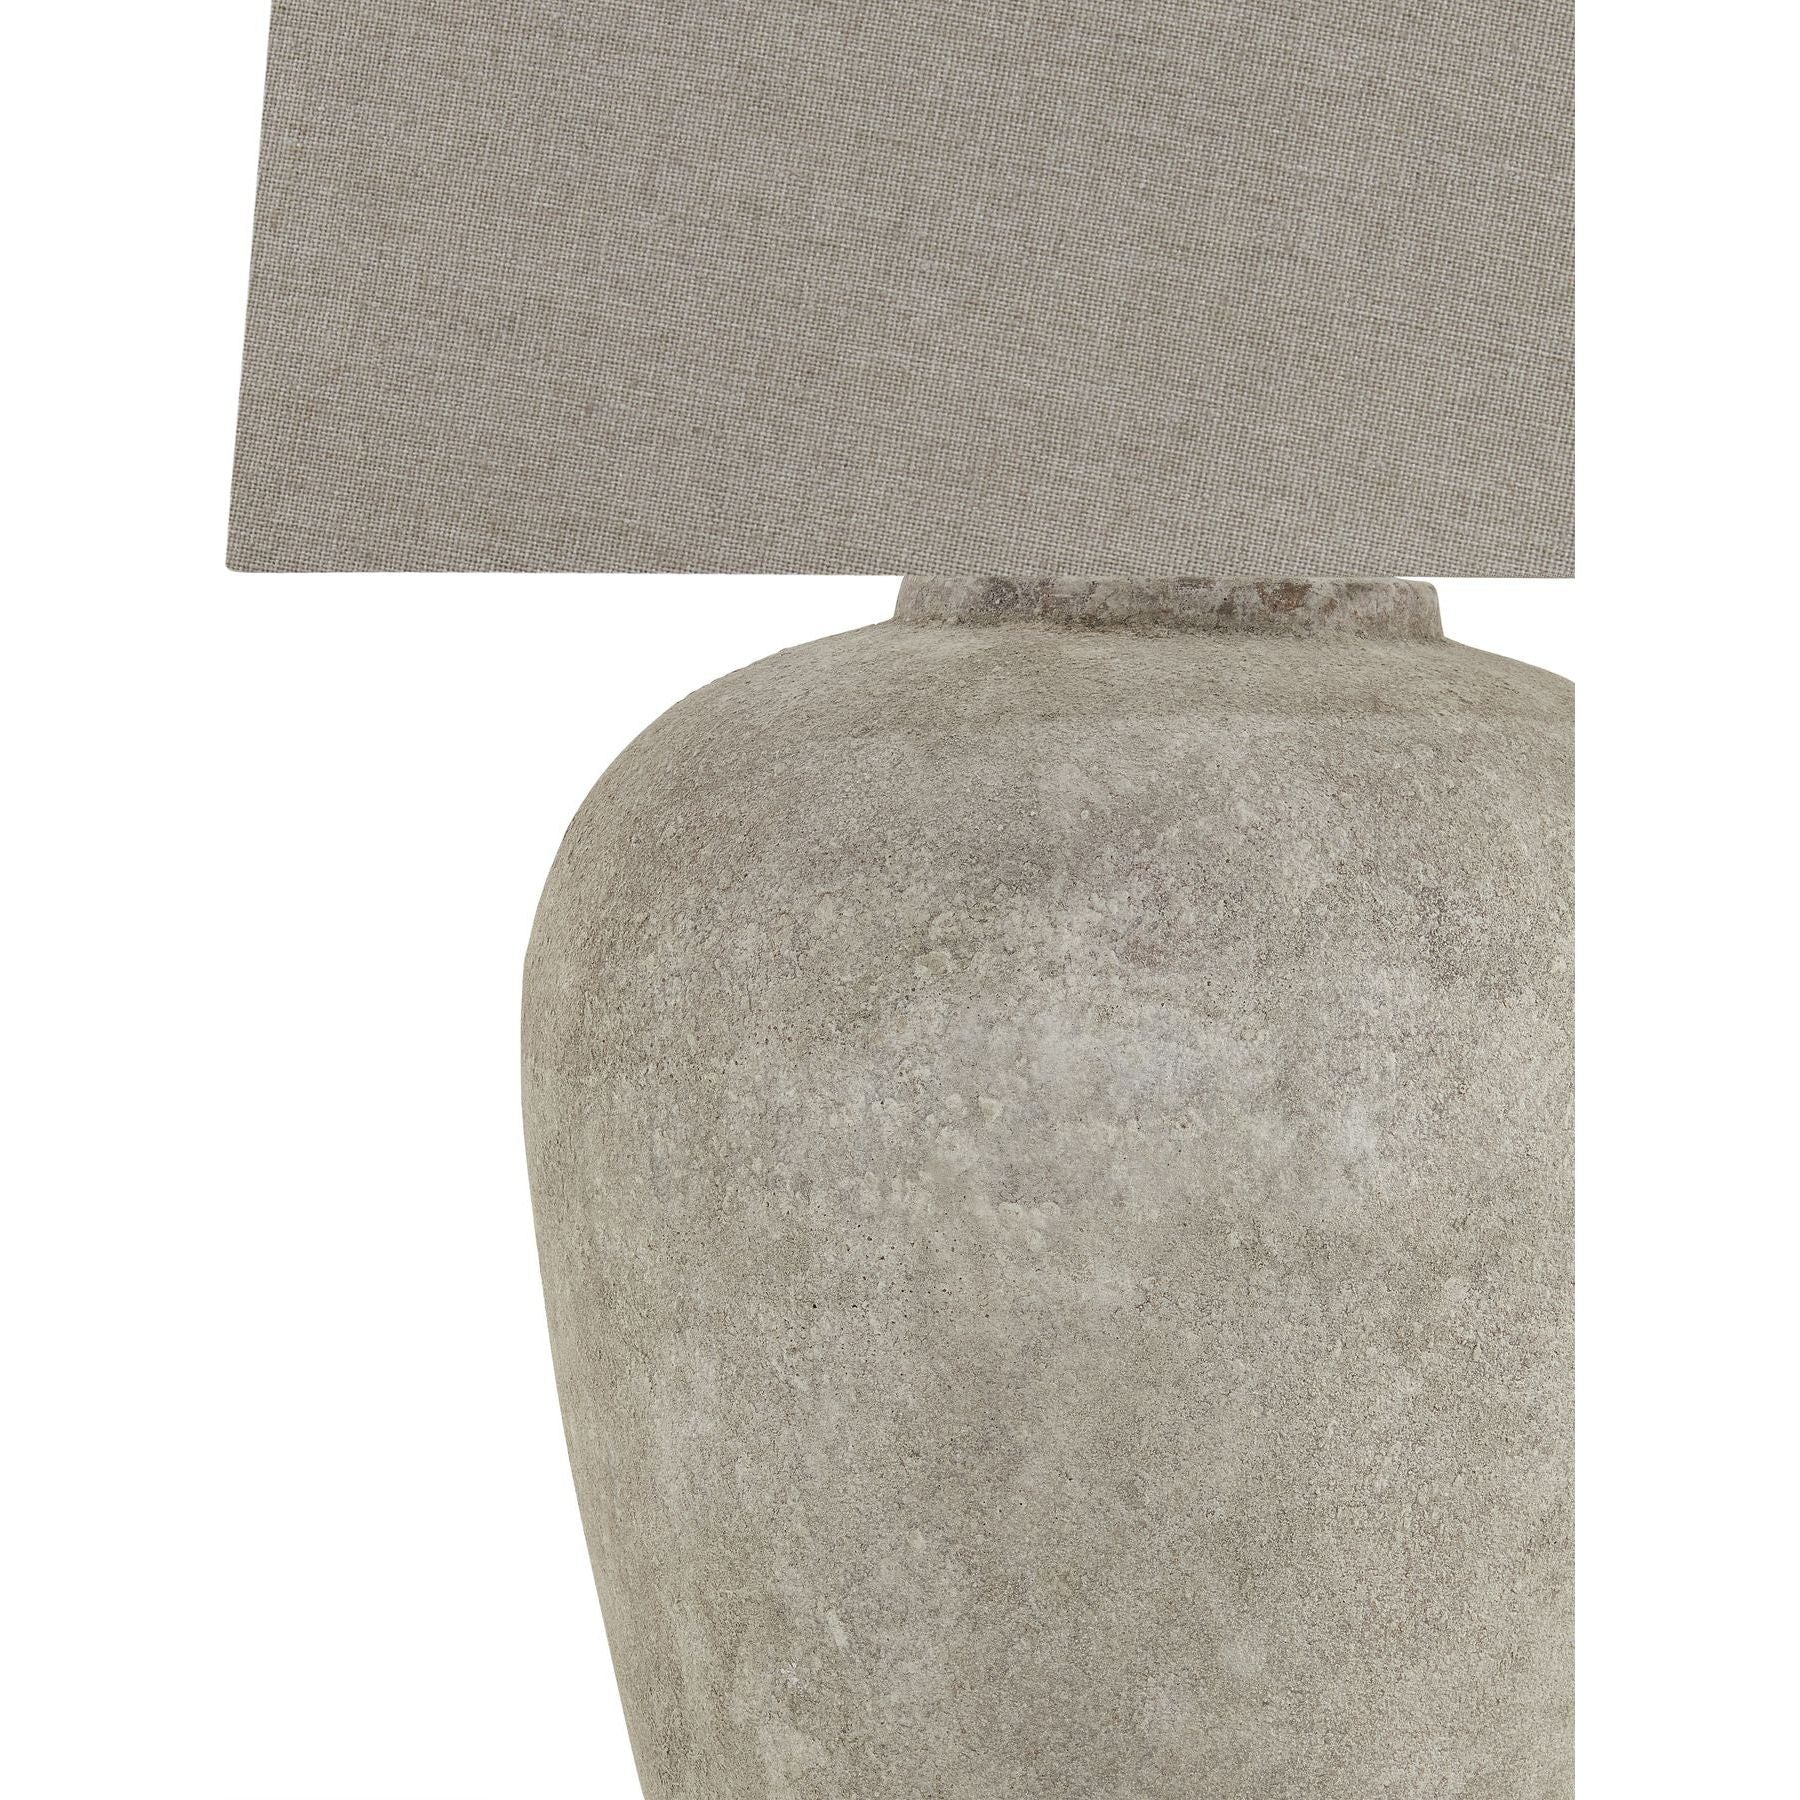 Athena Aged Stone Tall Table Lamp With Linen Shade - Ashton and Finch